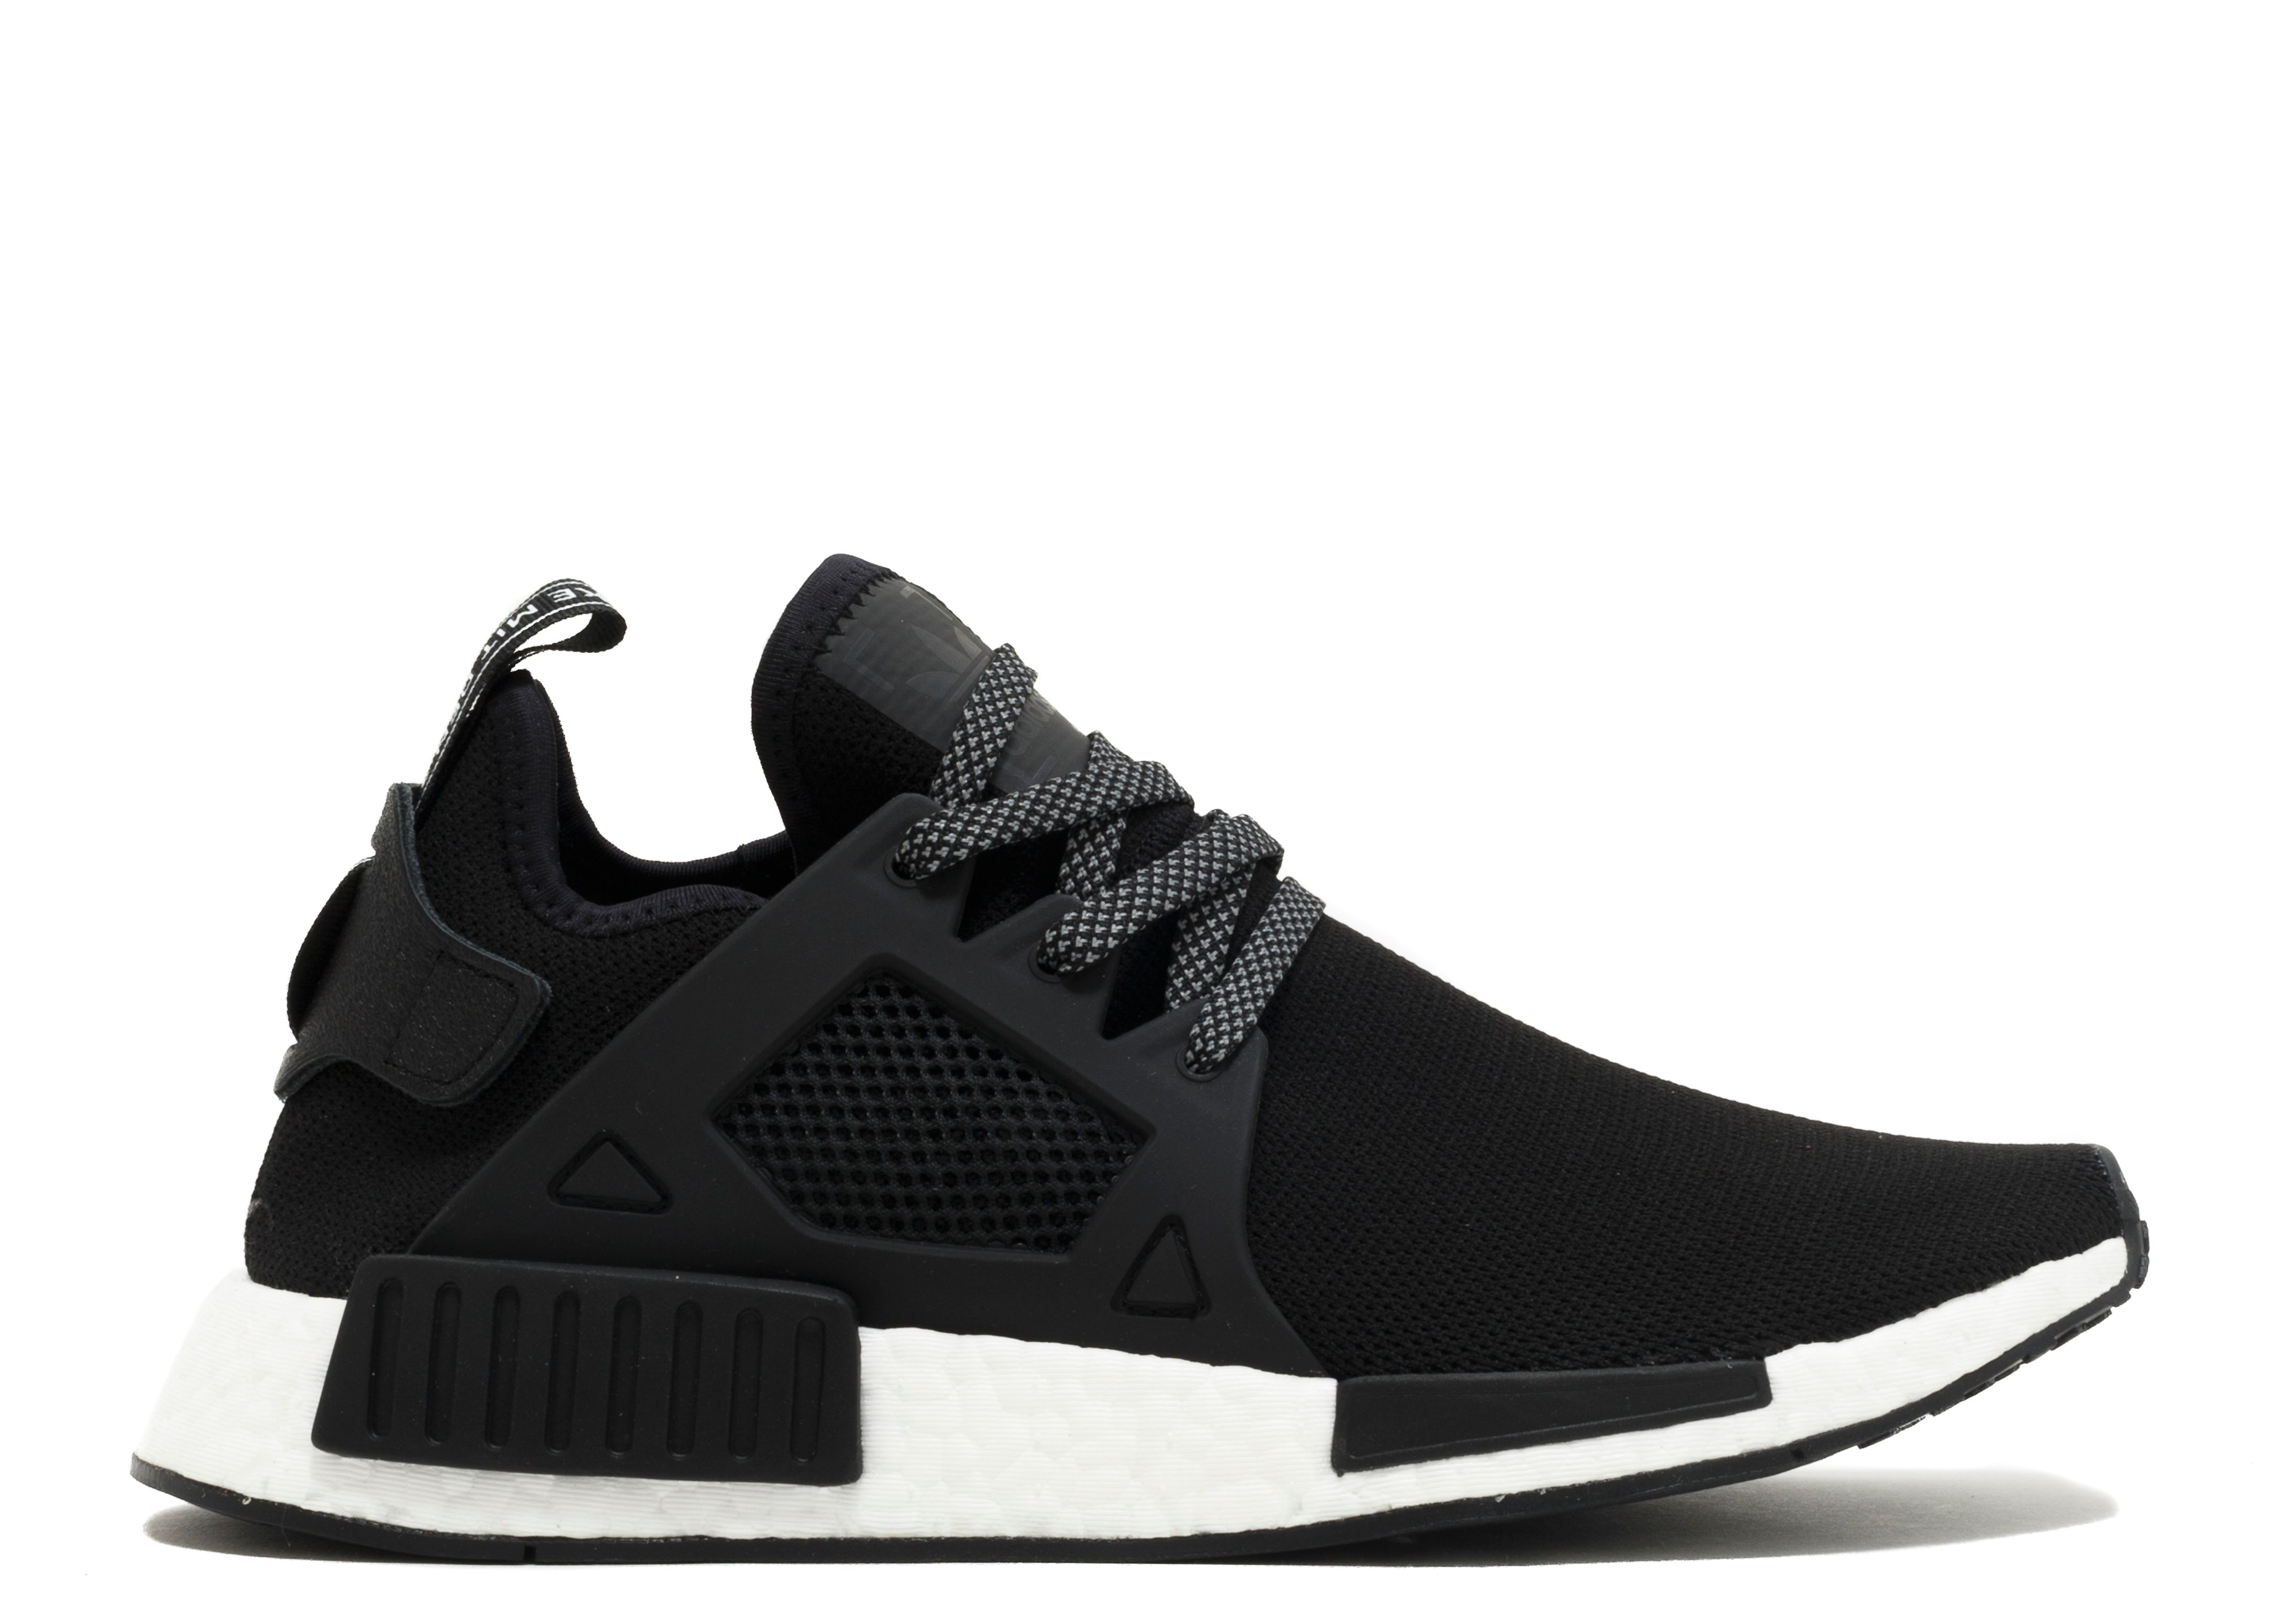 NMD_XR1 'Core Black' - Adidas - BY3050 